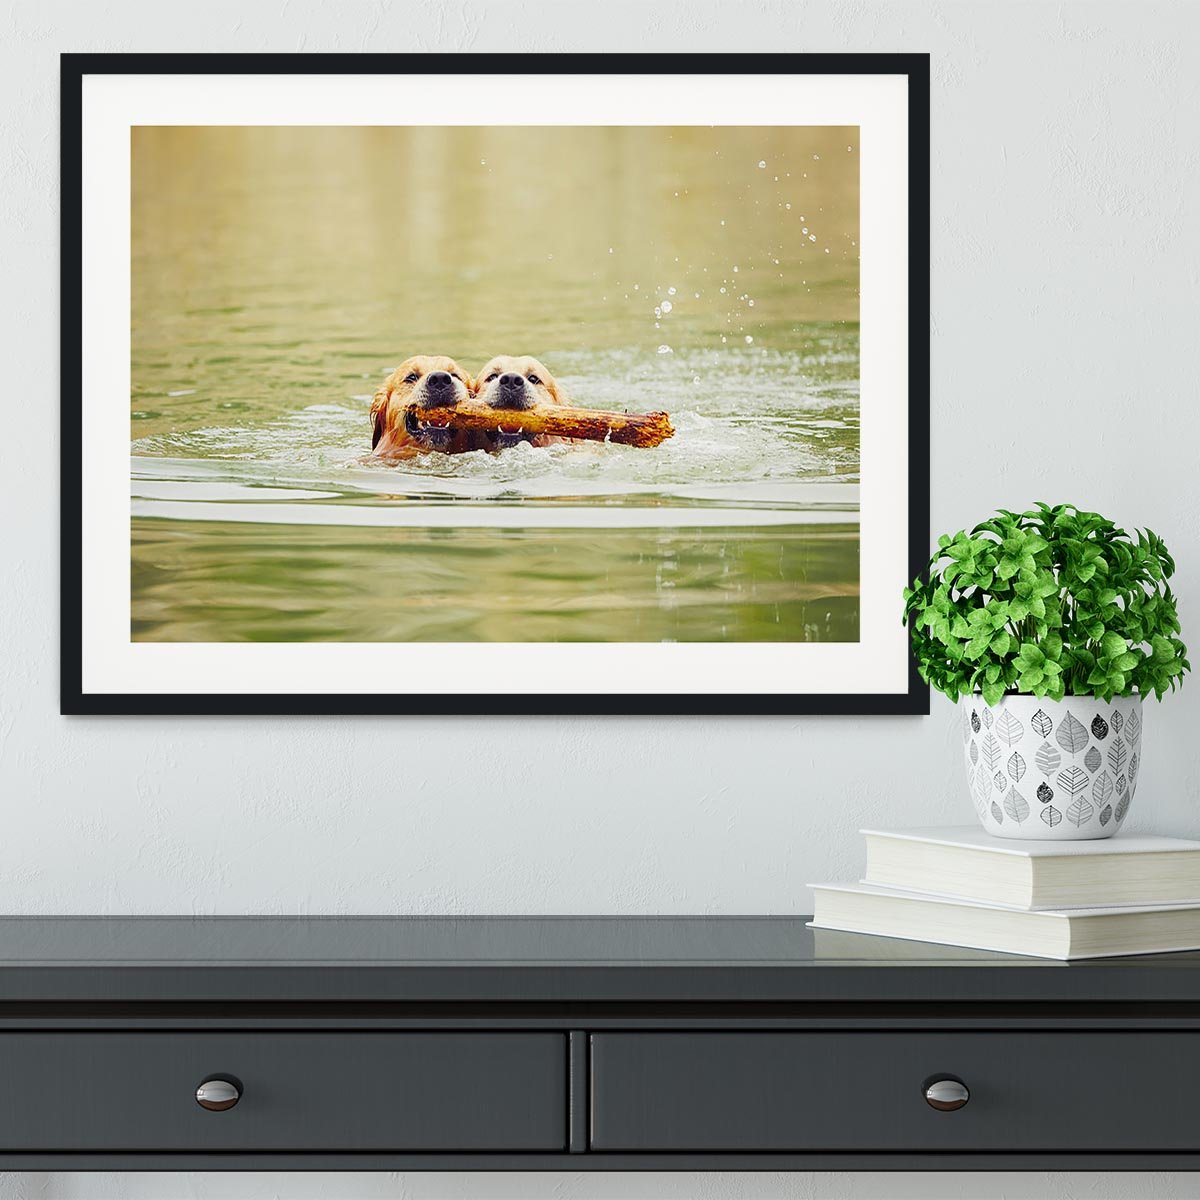 Two golden retrievers dogs are swimming with stick Framed Print - Canvas Art Rocks - 1